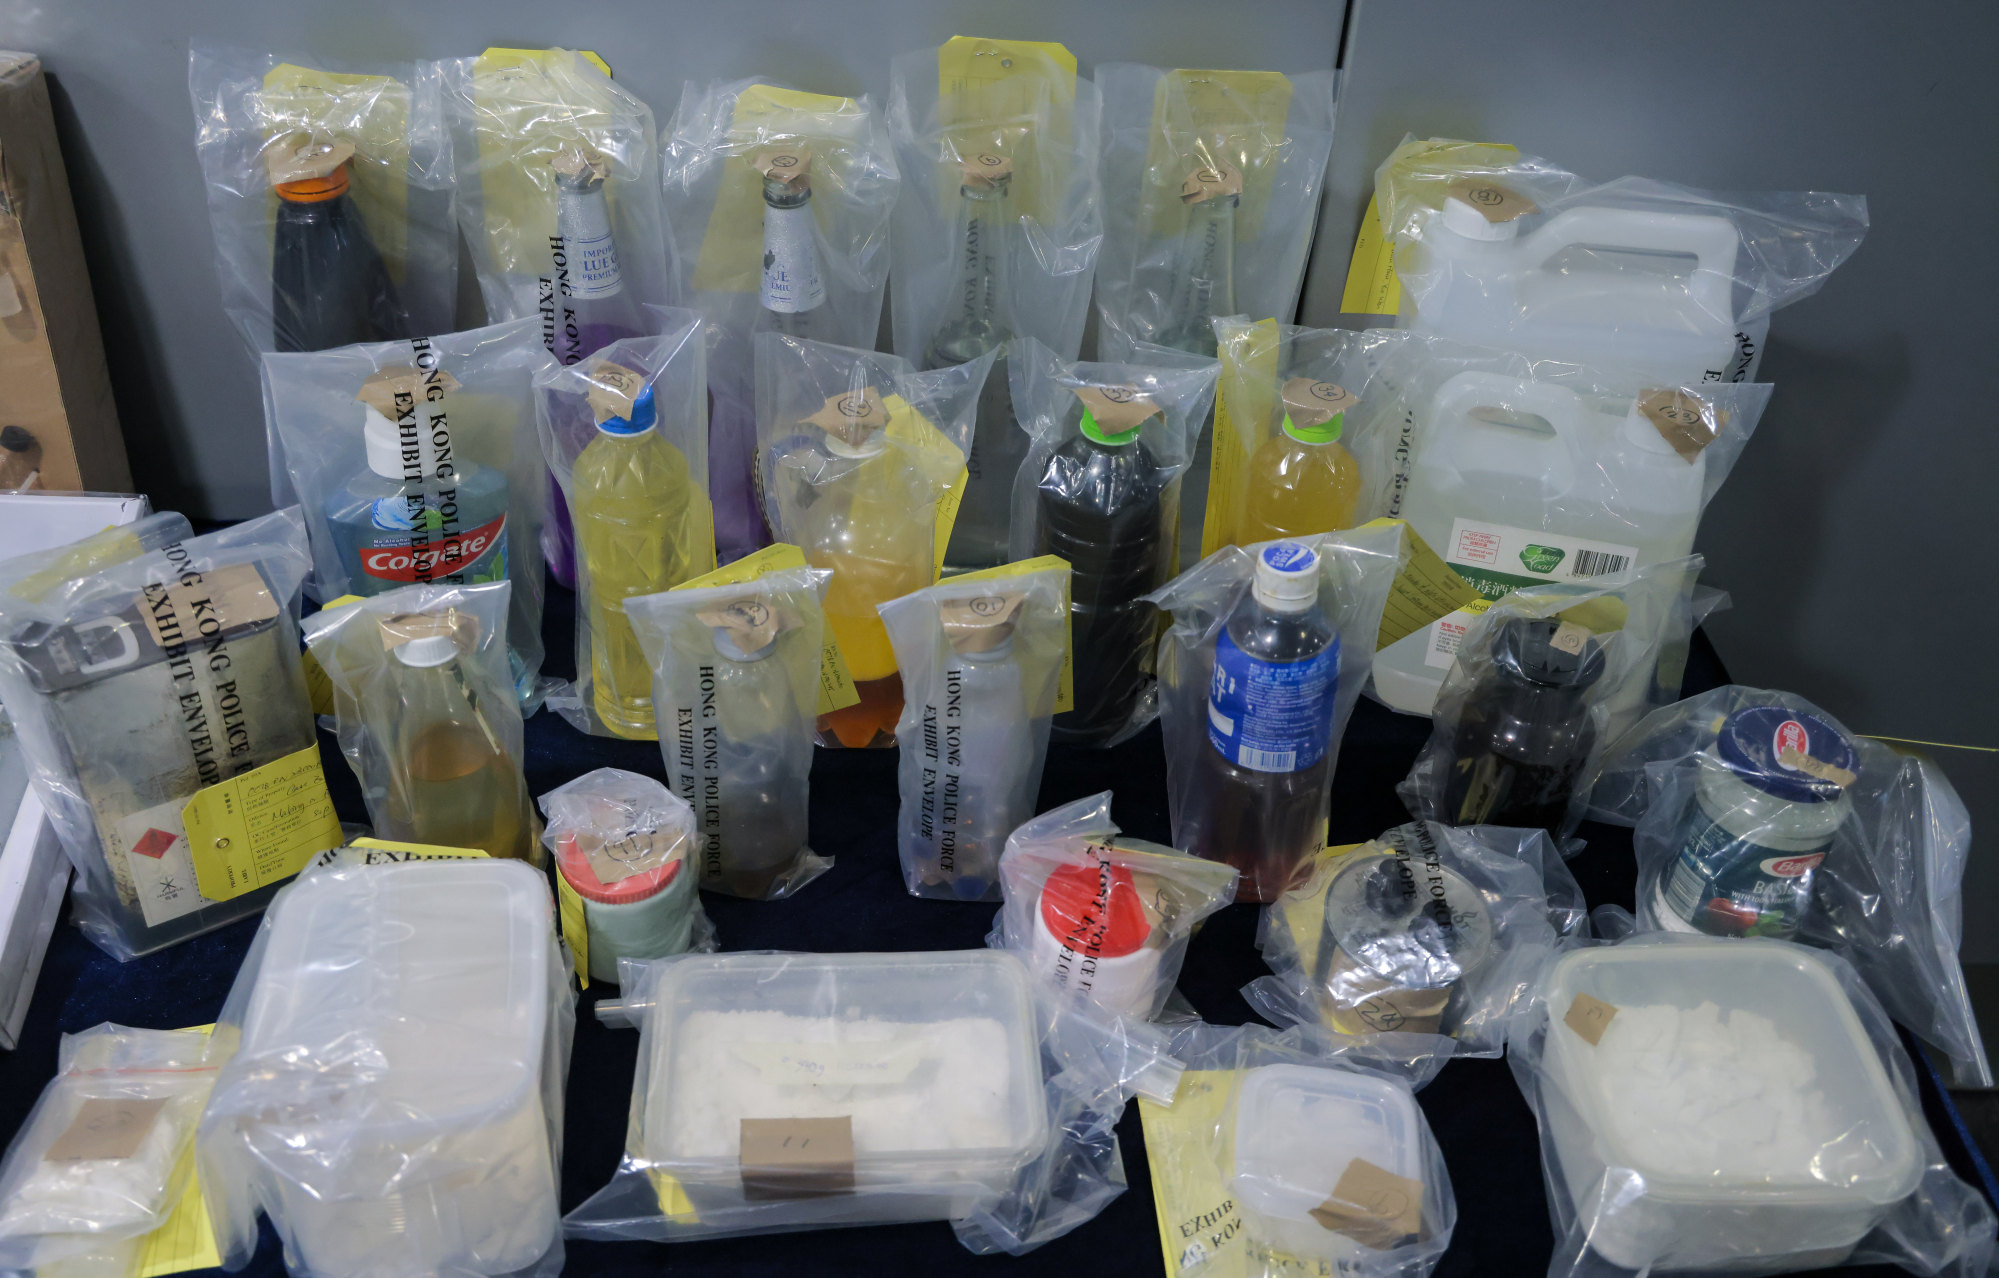 Police show evidence seized during raids, including 30kg of various types of chemicals, electronic scales and laboratory apparatus. Photo: Jelly Tse